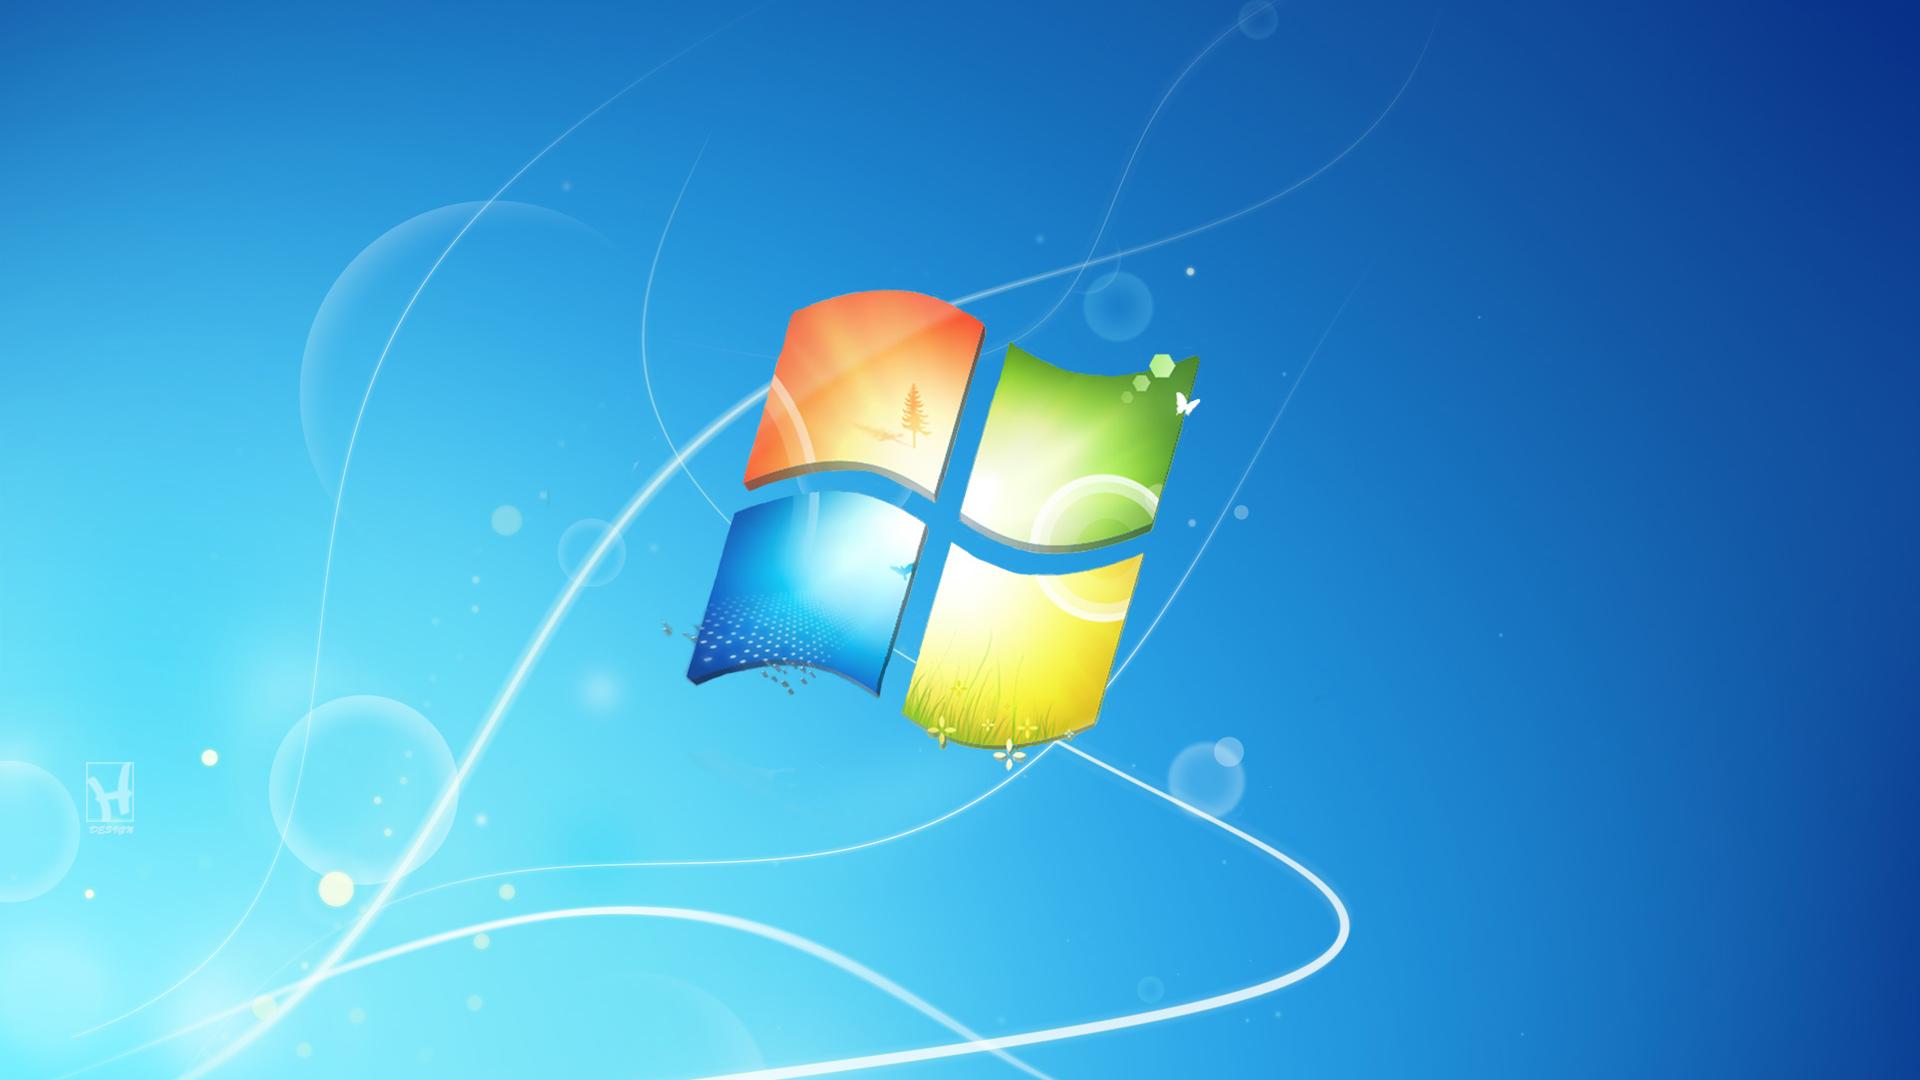 Cool Blue Background Windows Xp System